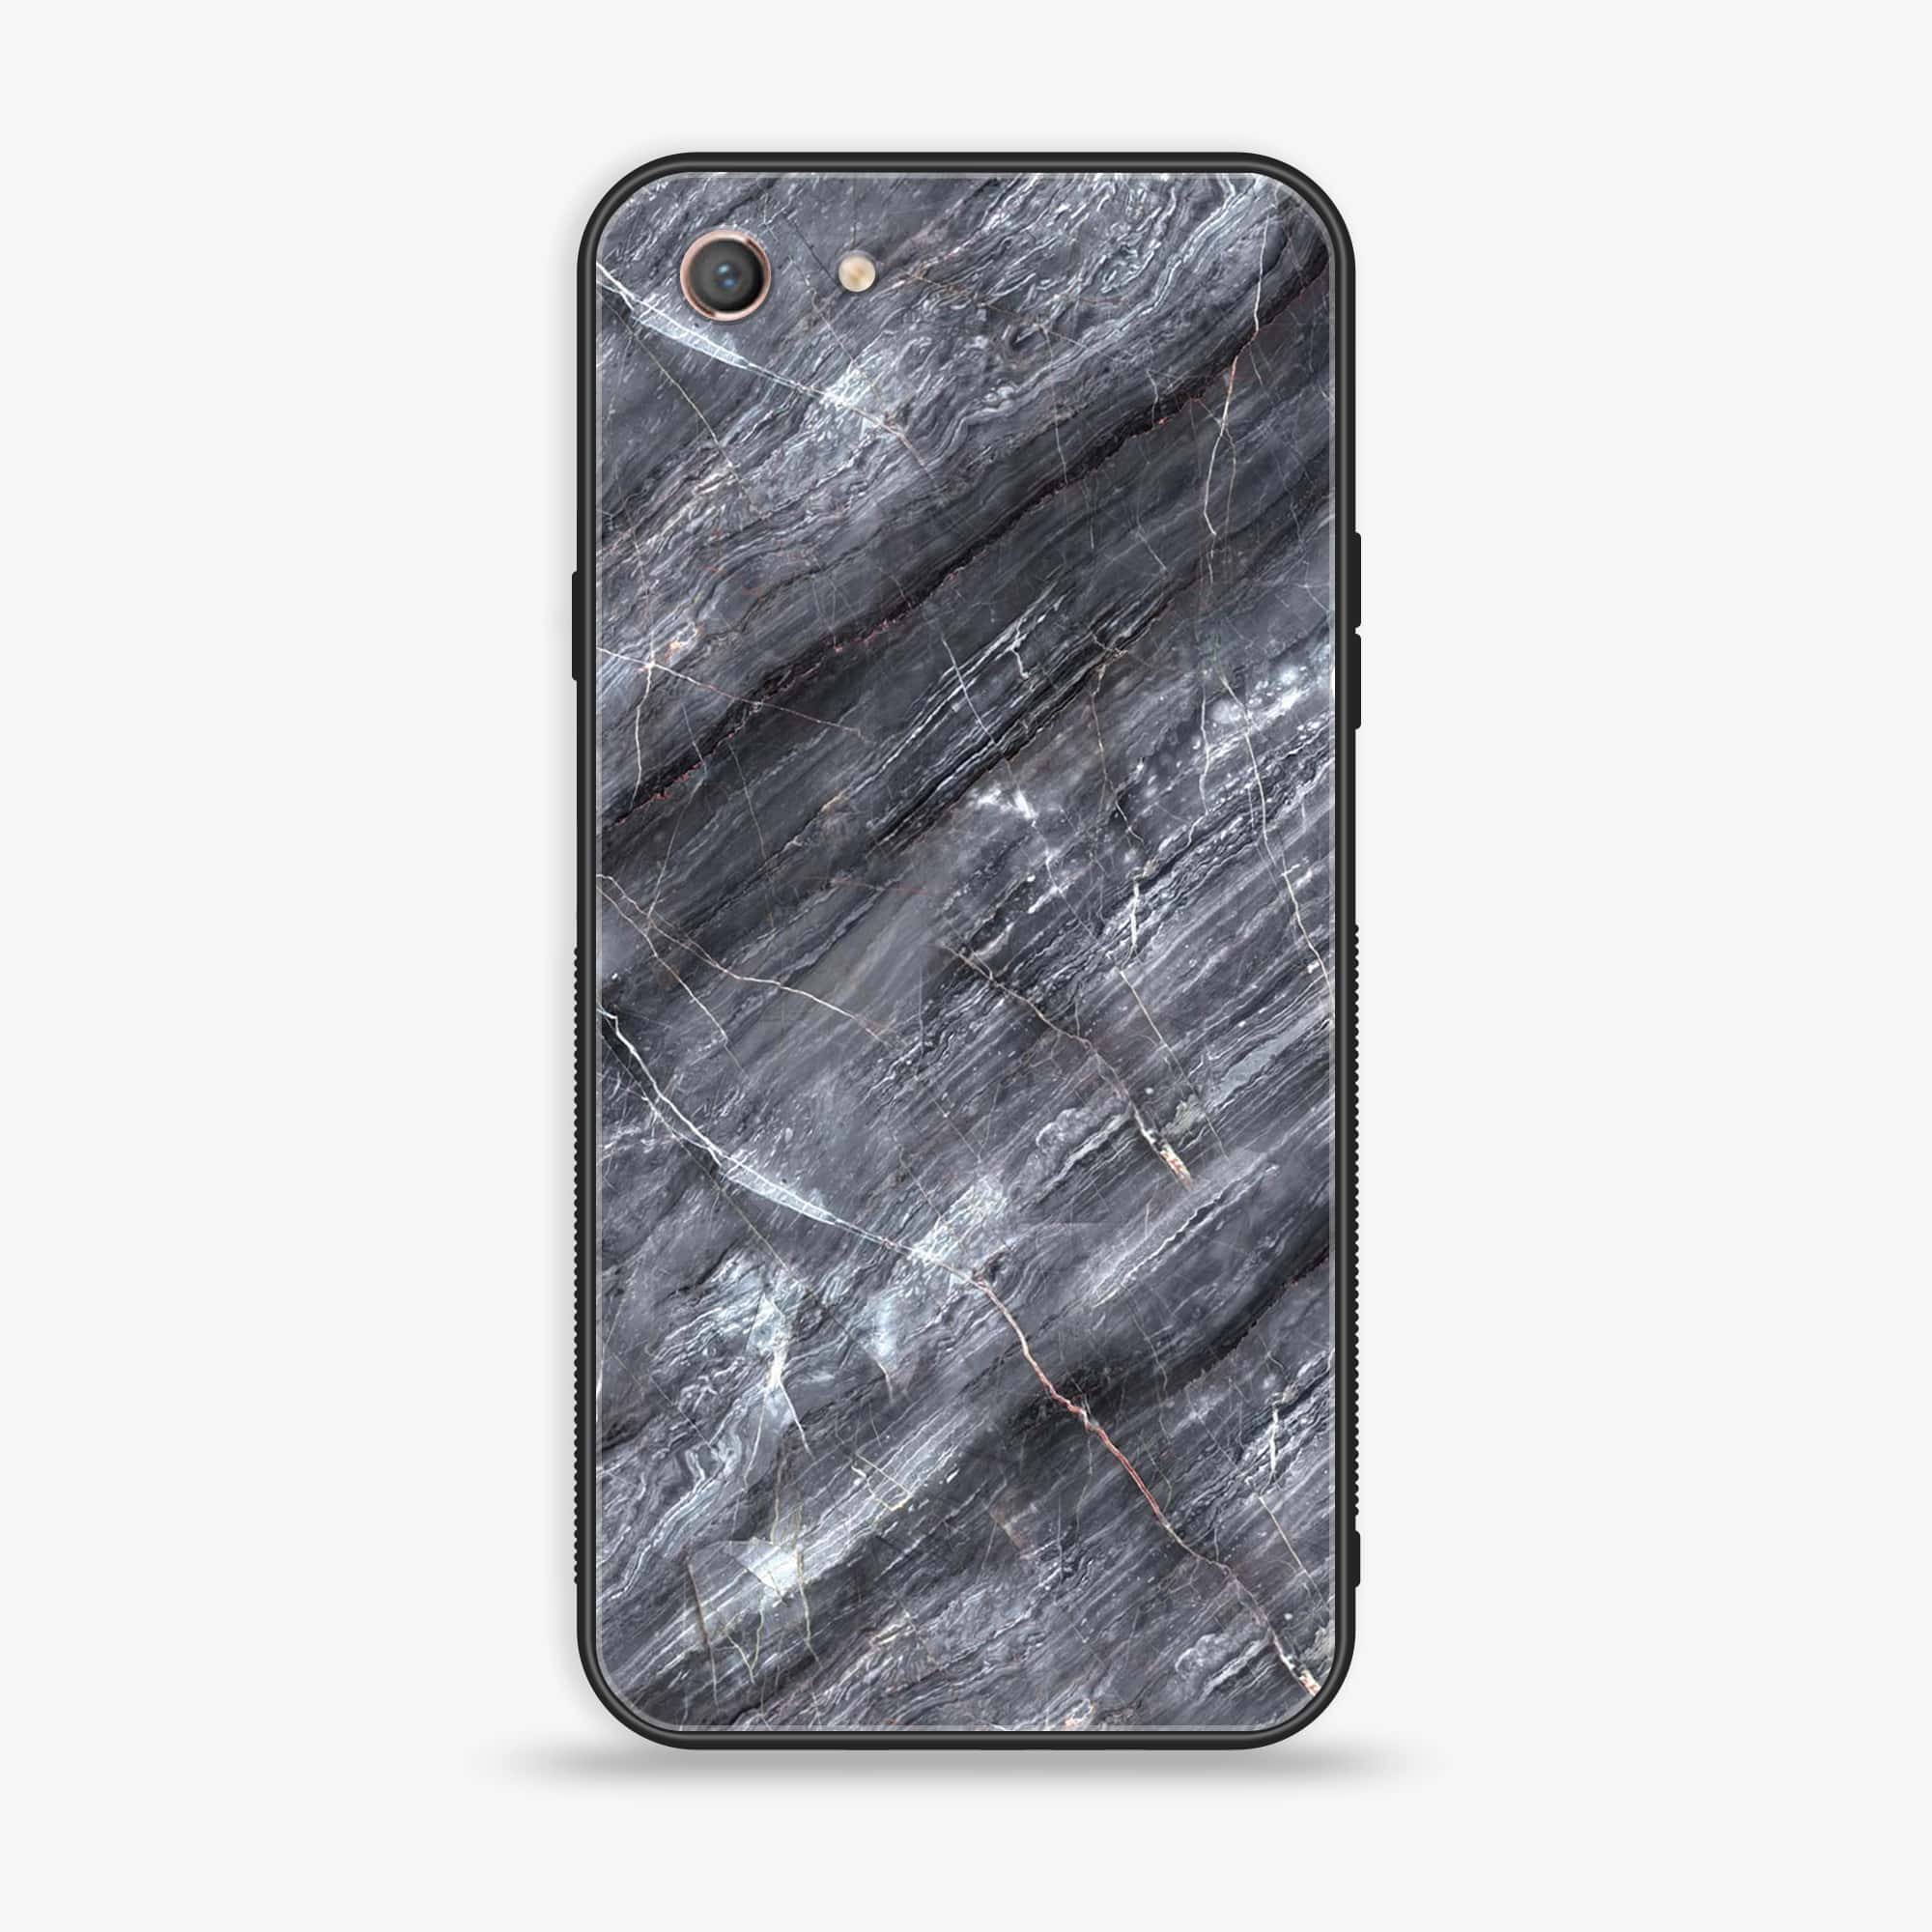 Oppo A71 (2018) - Black Marble 2.0 Series - Premium Printed Glass soft Bumper shock Proof Case